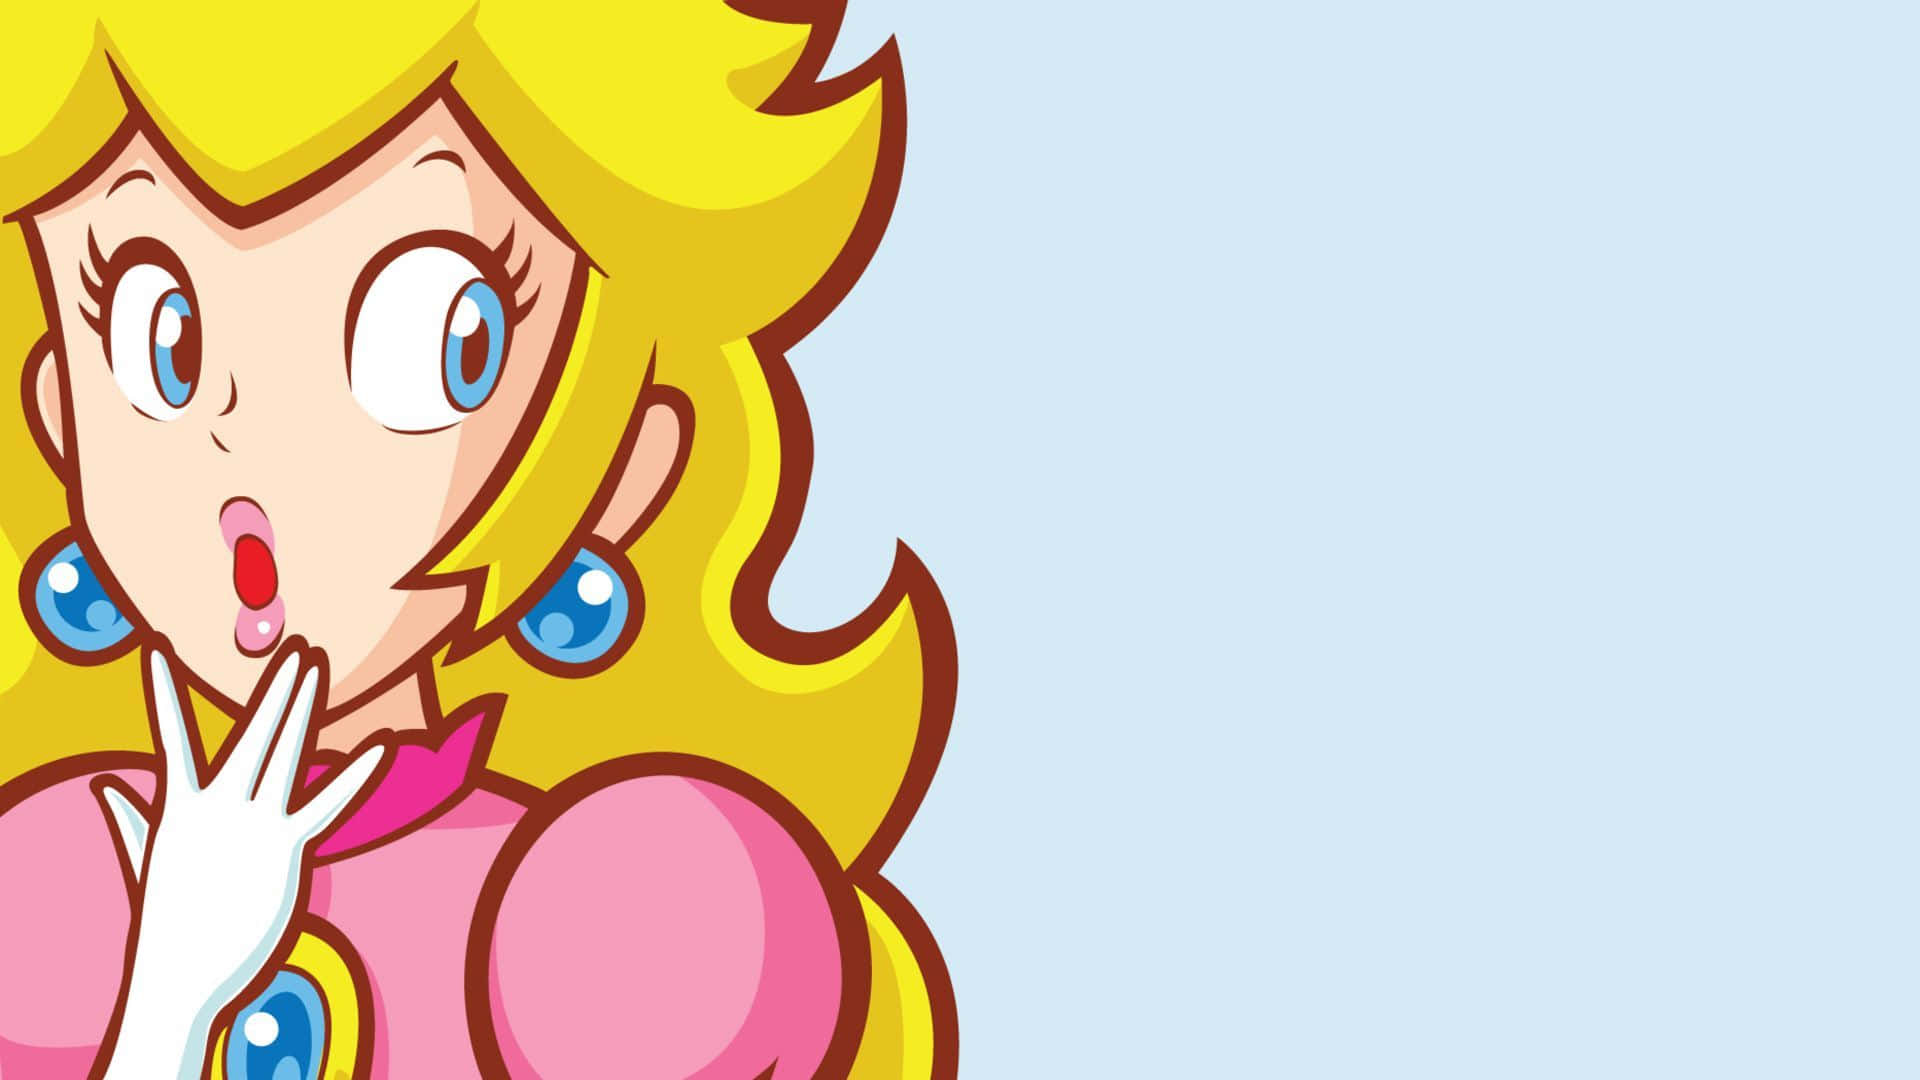 “Princess Peach, the leading character from the Mario series of video games” Wallpaper